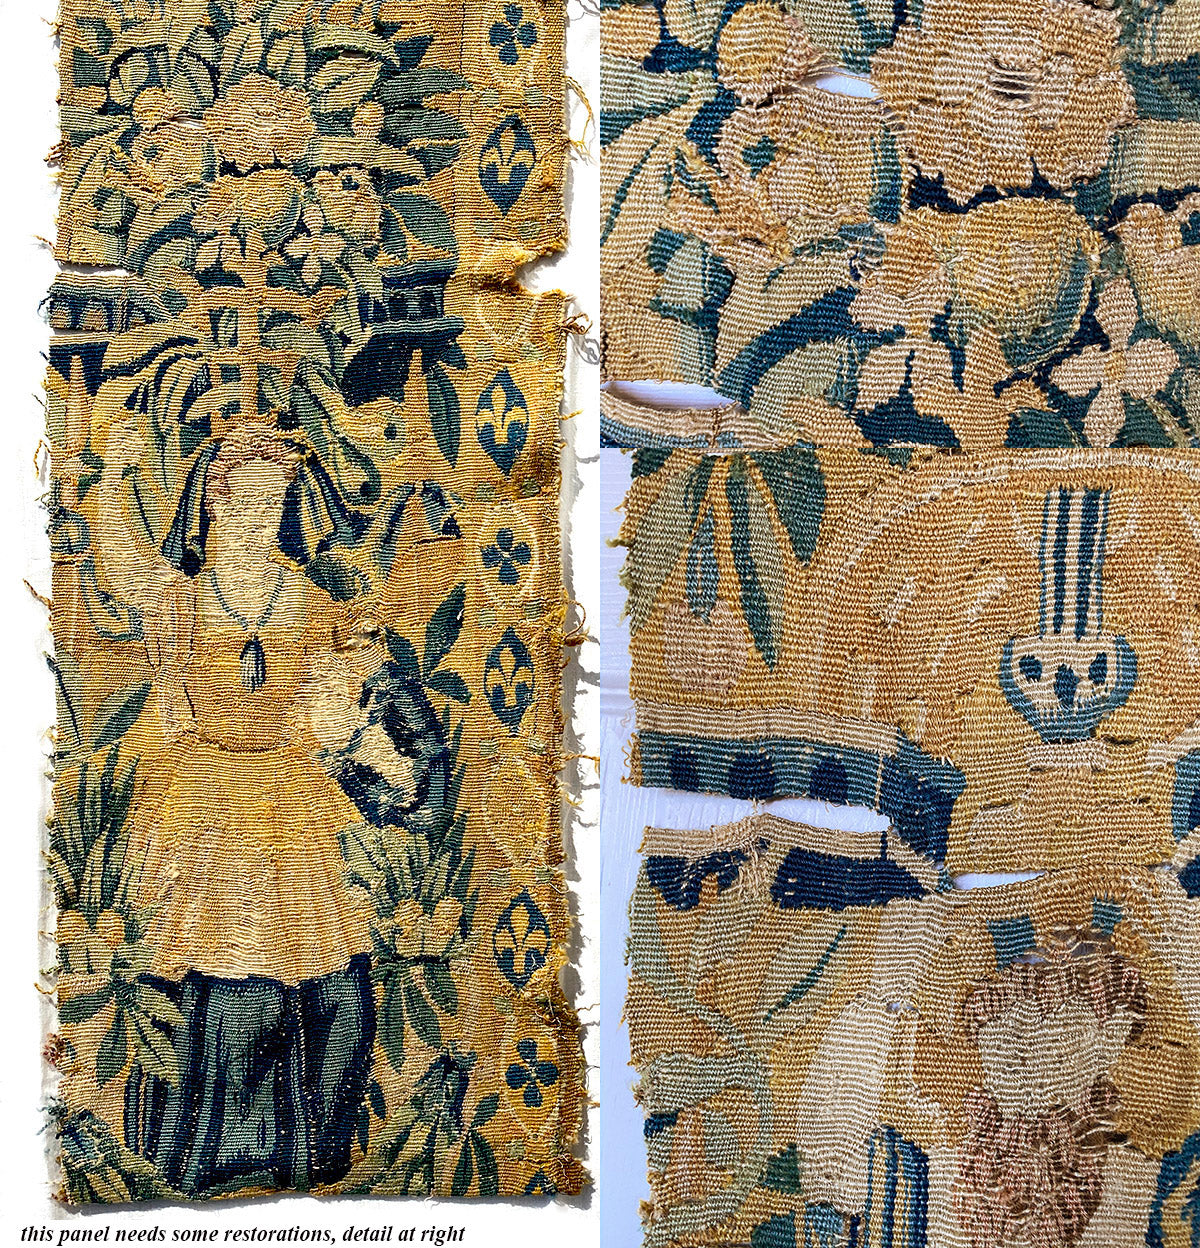 Pair Antique 17th Century French or Flemish Figural 89" x 15" Tapestry Panels for Wall or Pillows